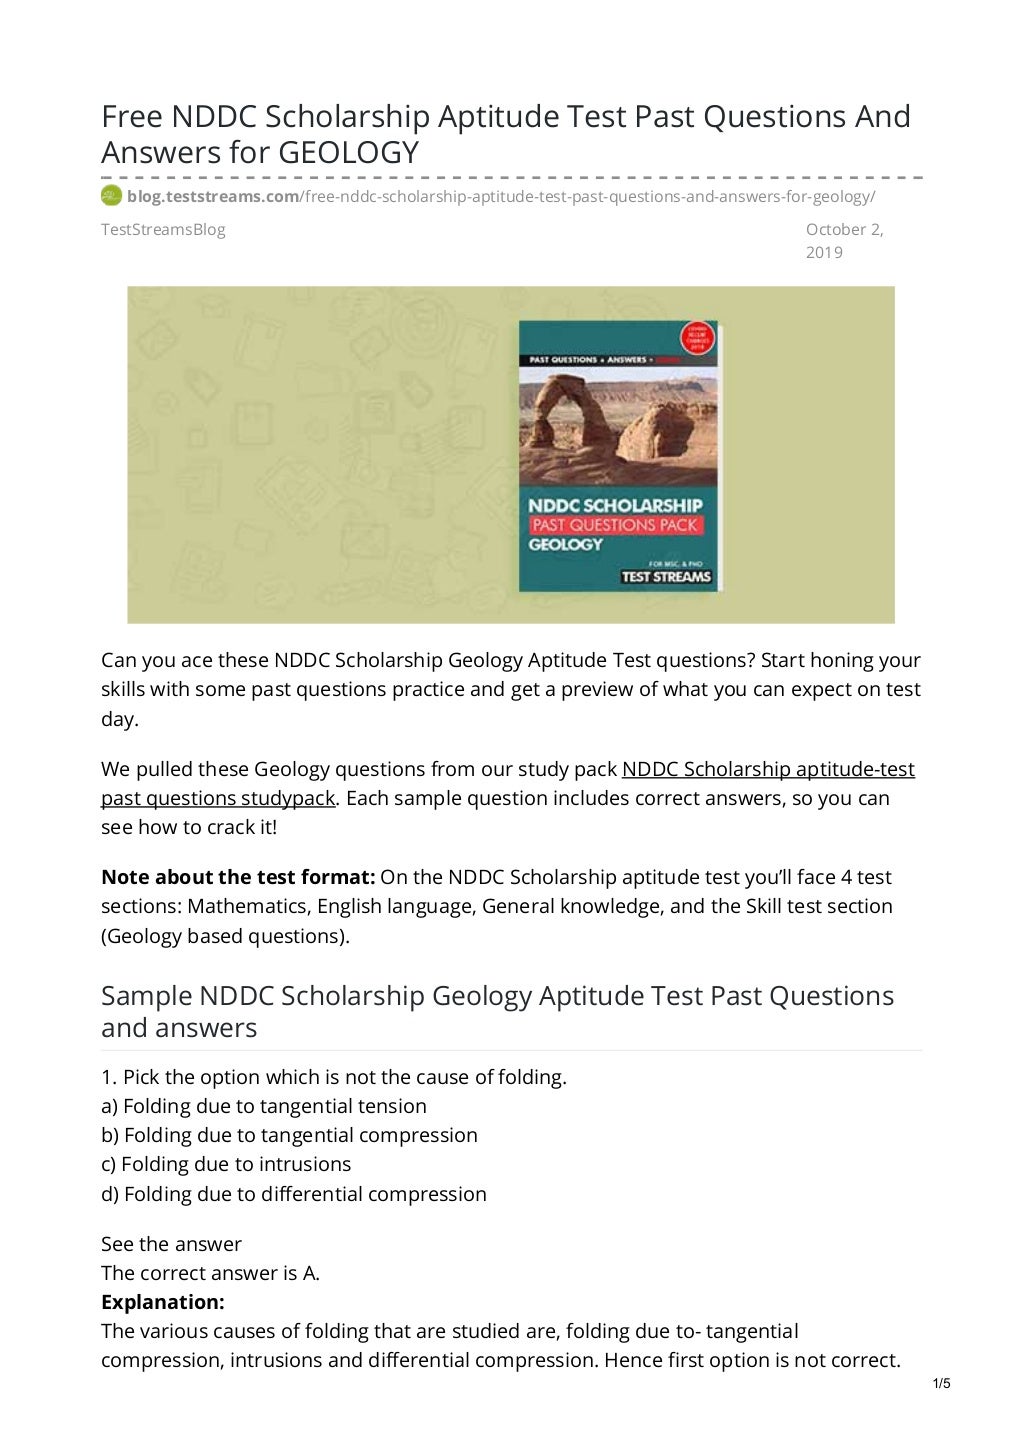 free-nddc-scholarship-aptitude-test-past-questions-and-answers-for-g